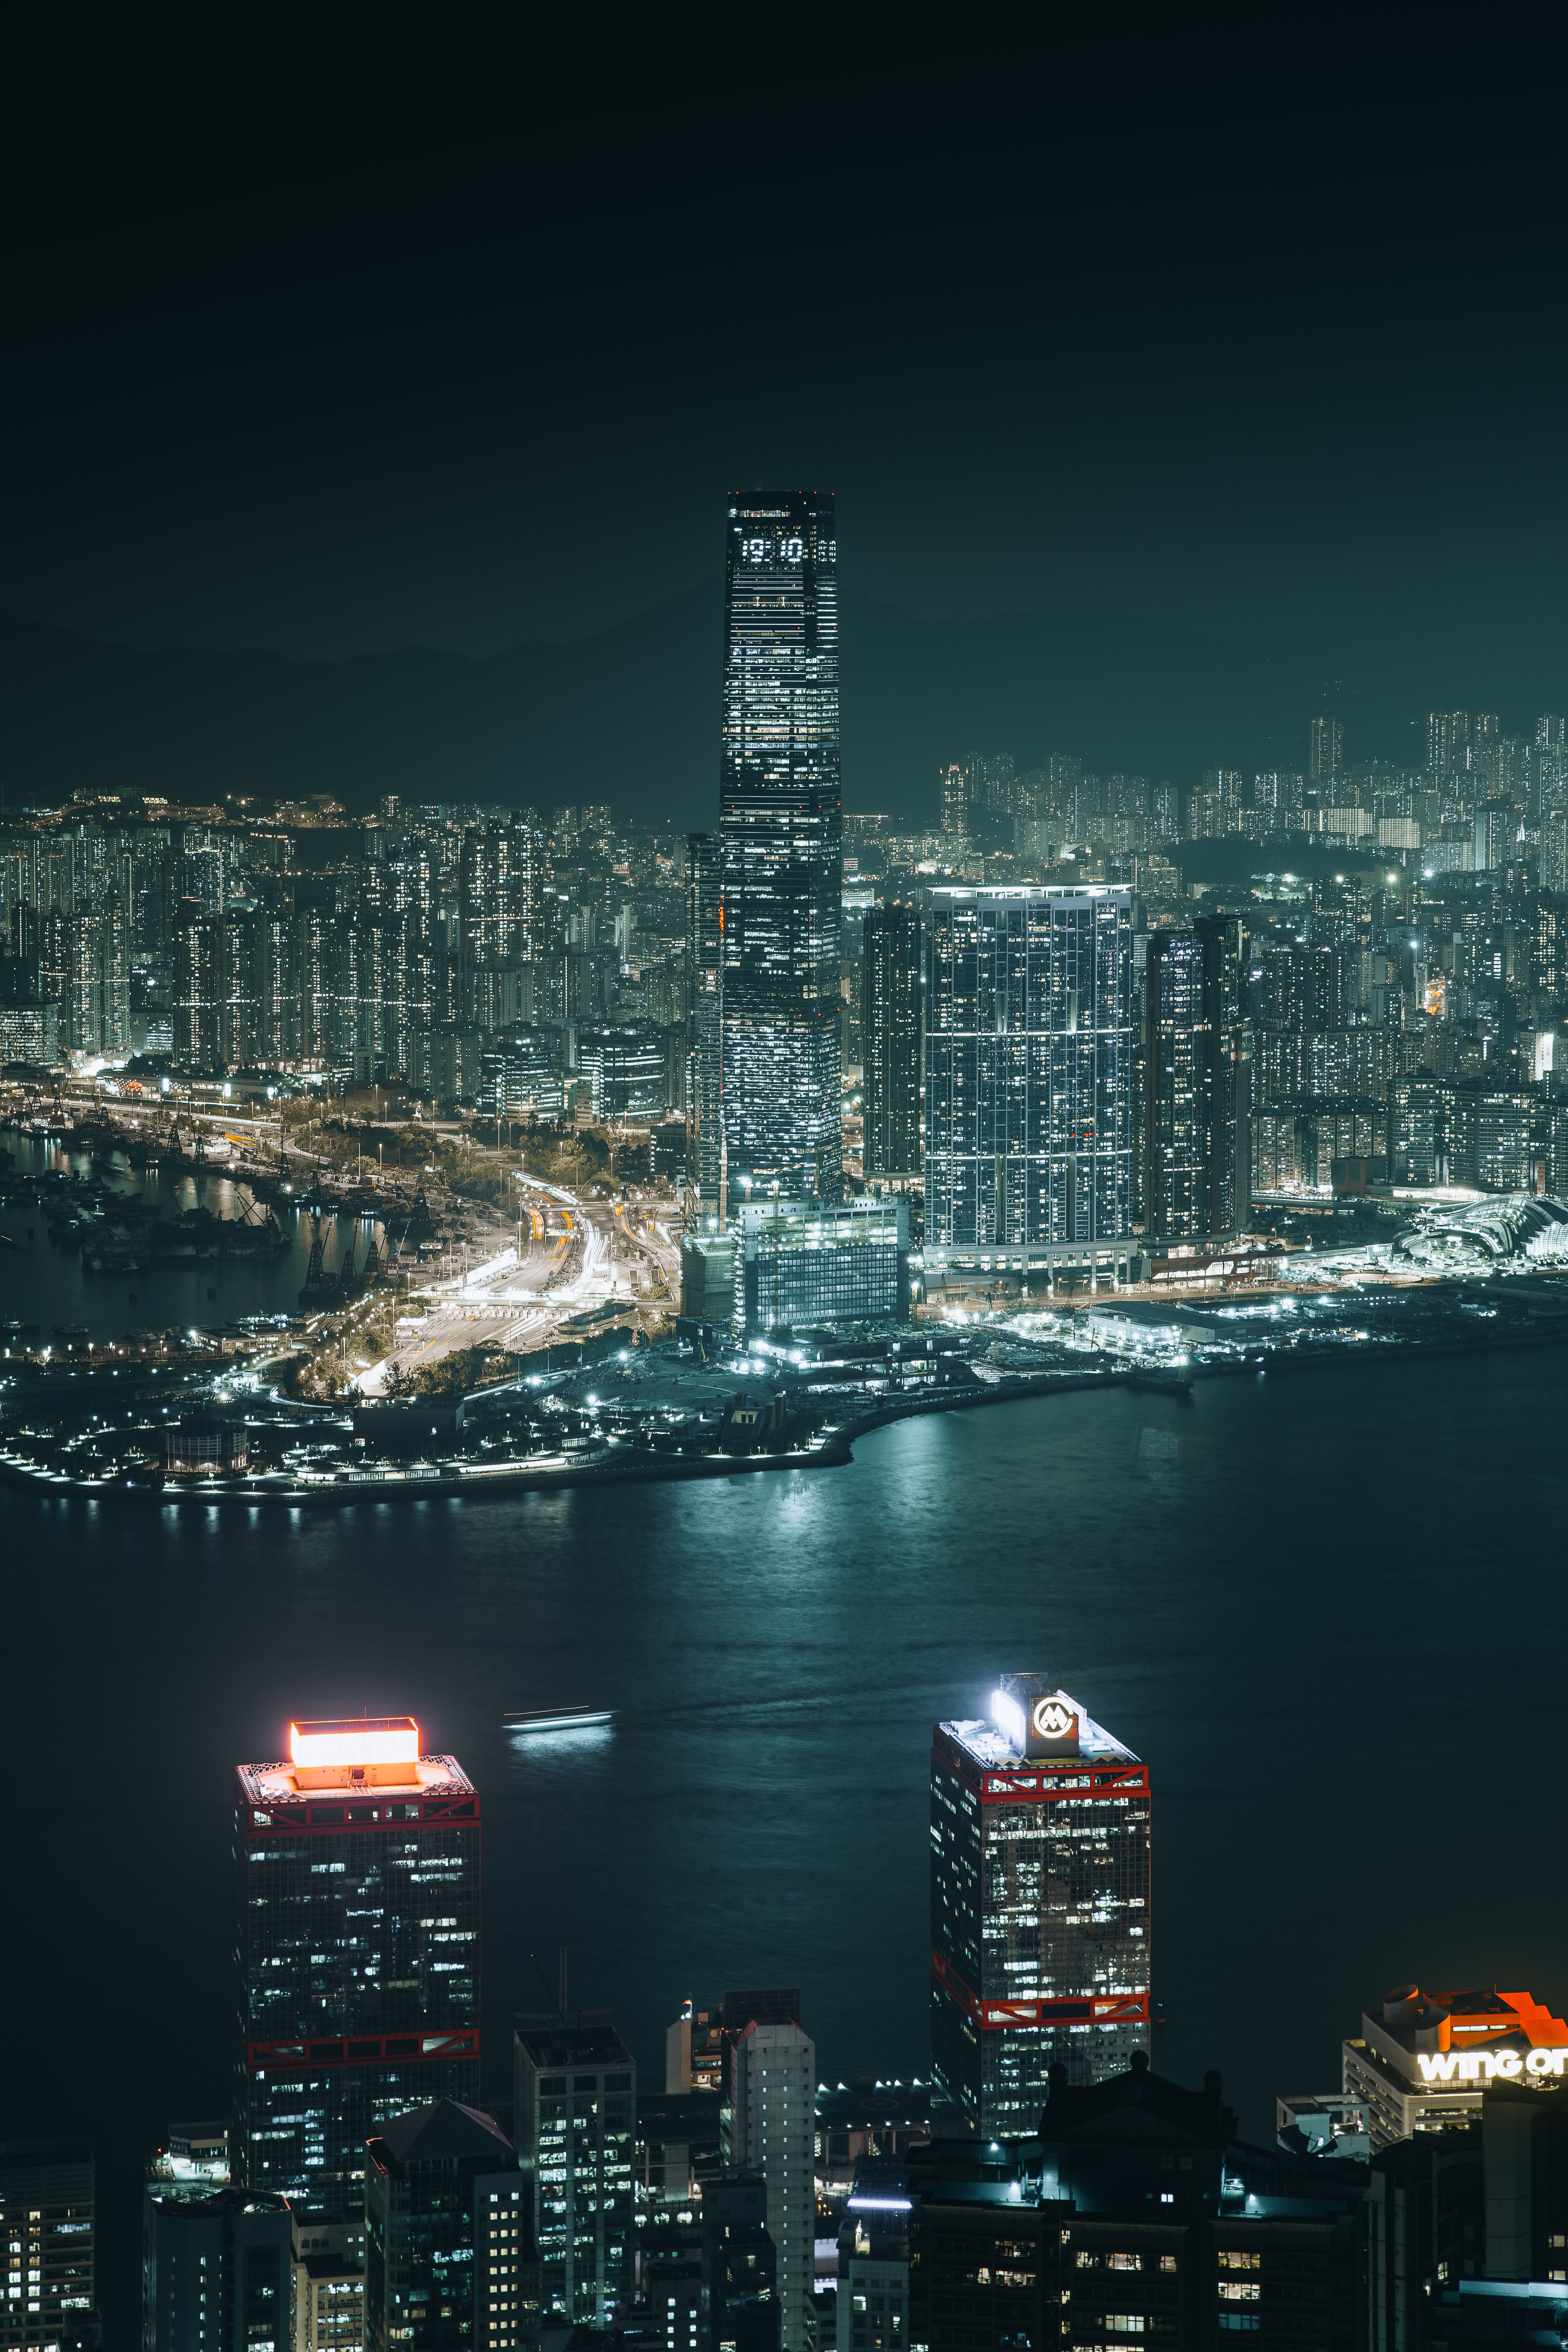 hong kong s a r, building, hong kong, cities, rivers, view from above, night city lock screen backgrounds